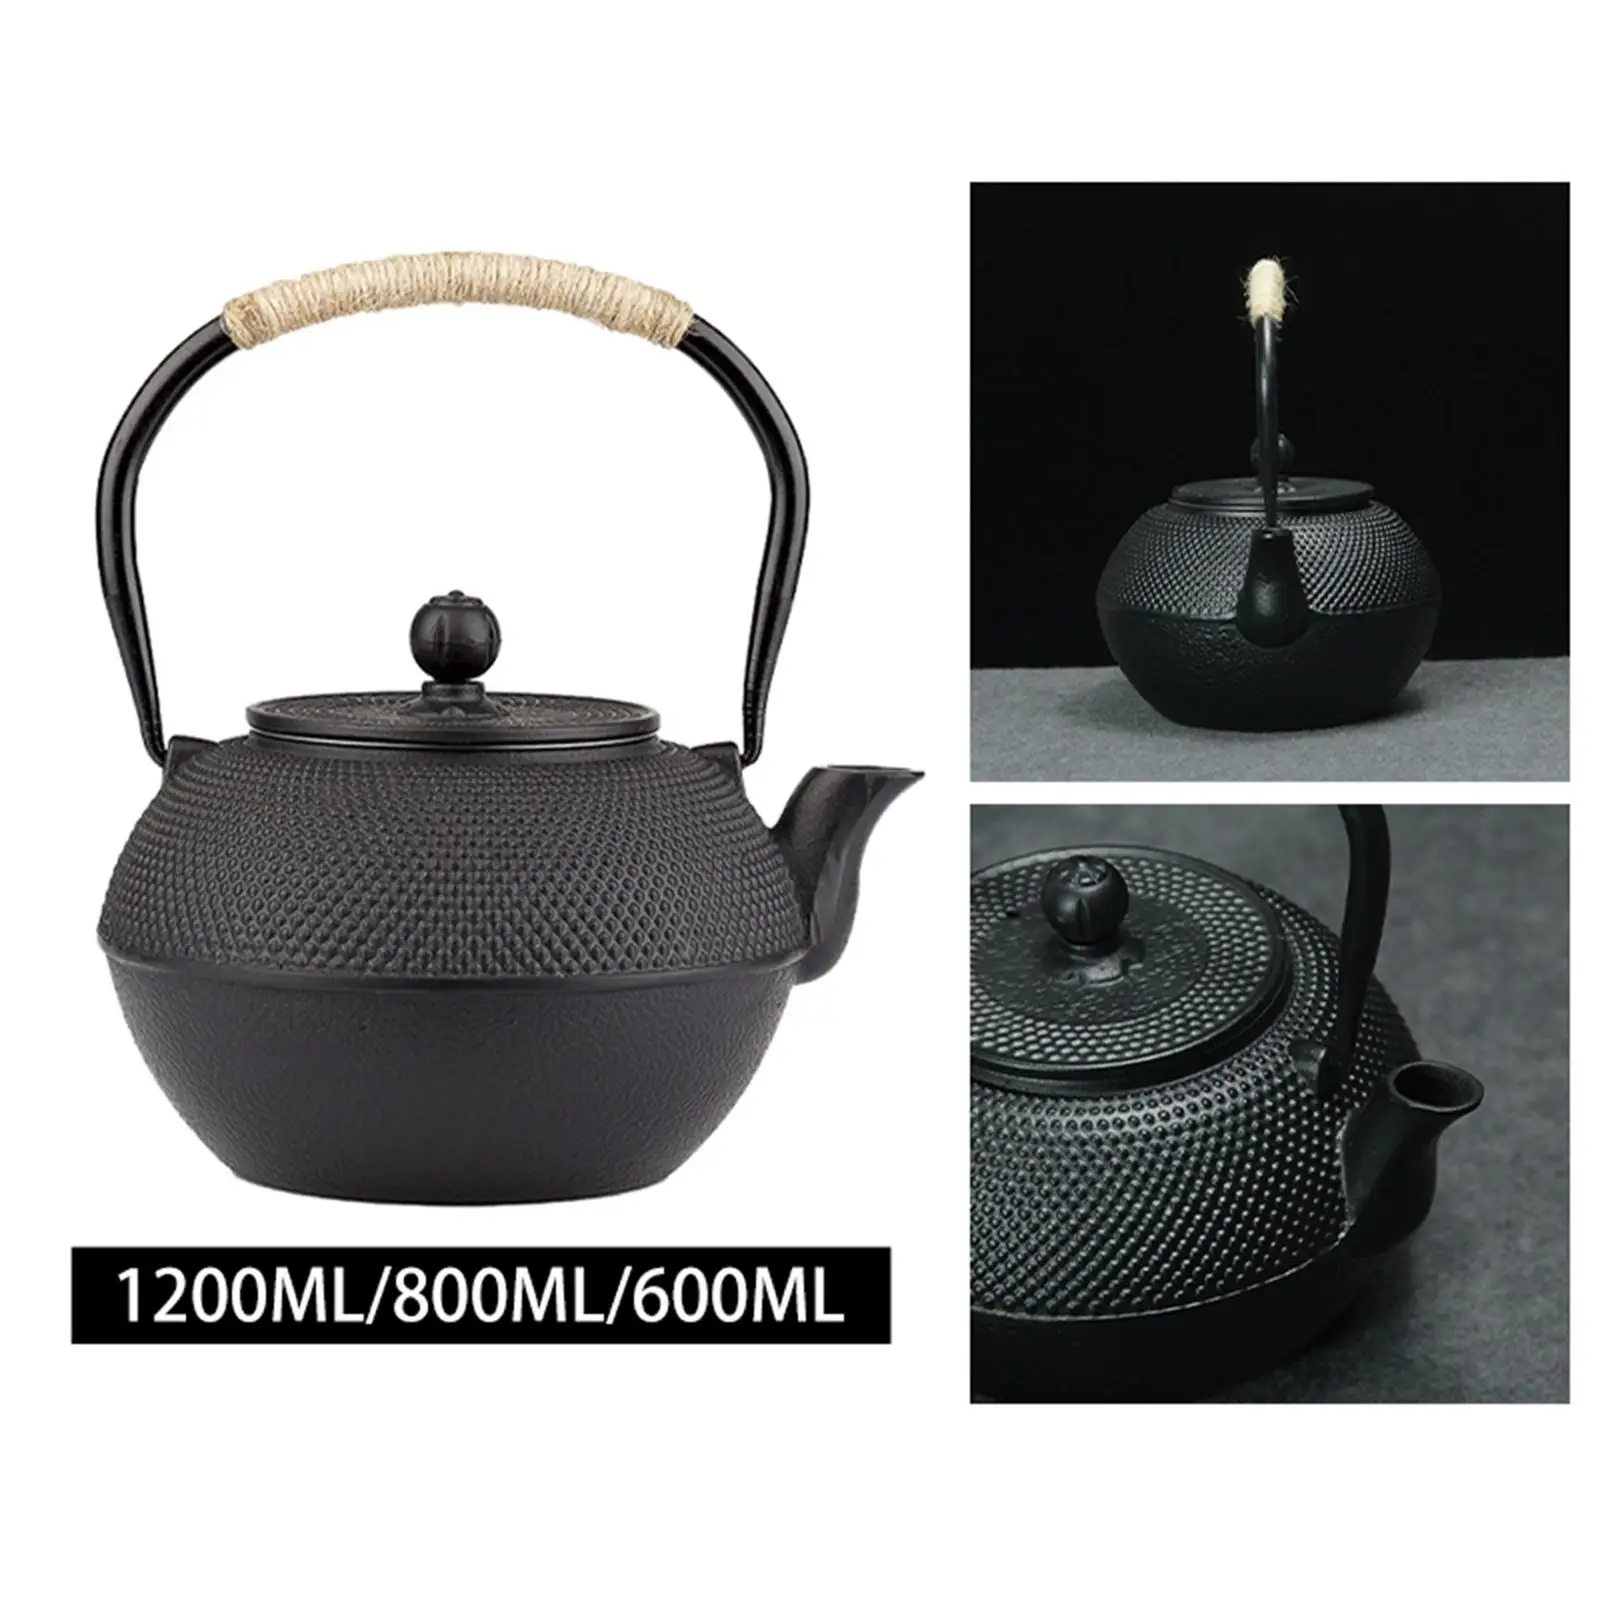 Cast Iron Teapot Tea Kettle Easily Clean Kitchen Decoration Gift Handle Wrapped with Rope Anti Scalding